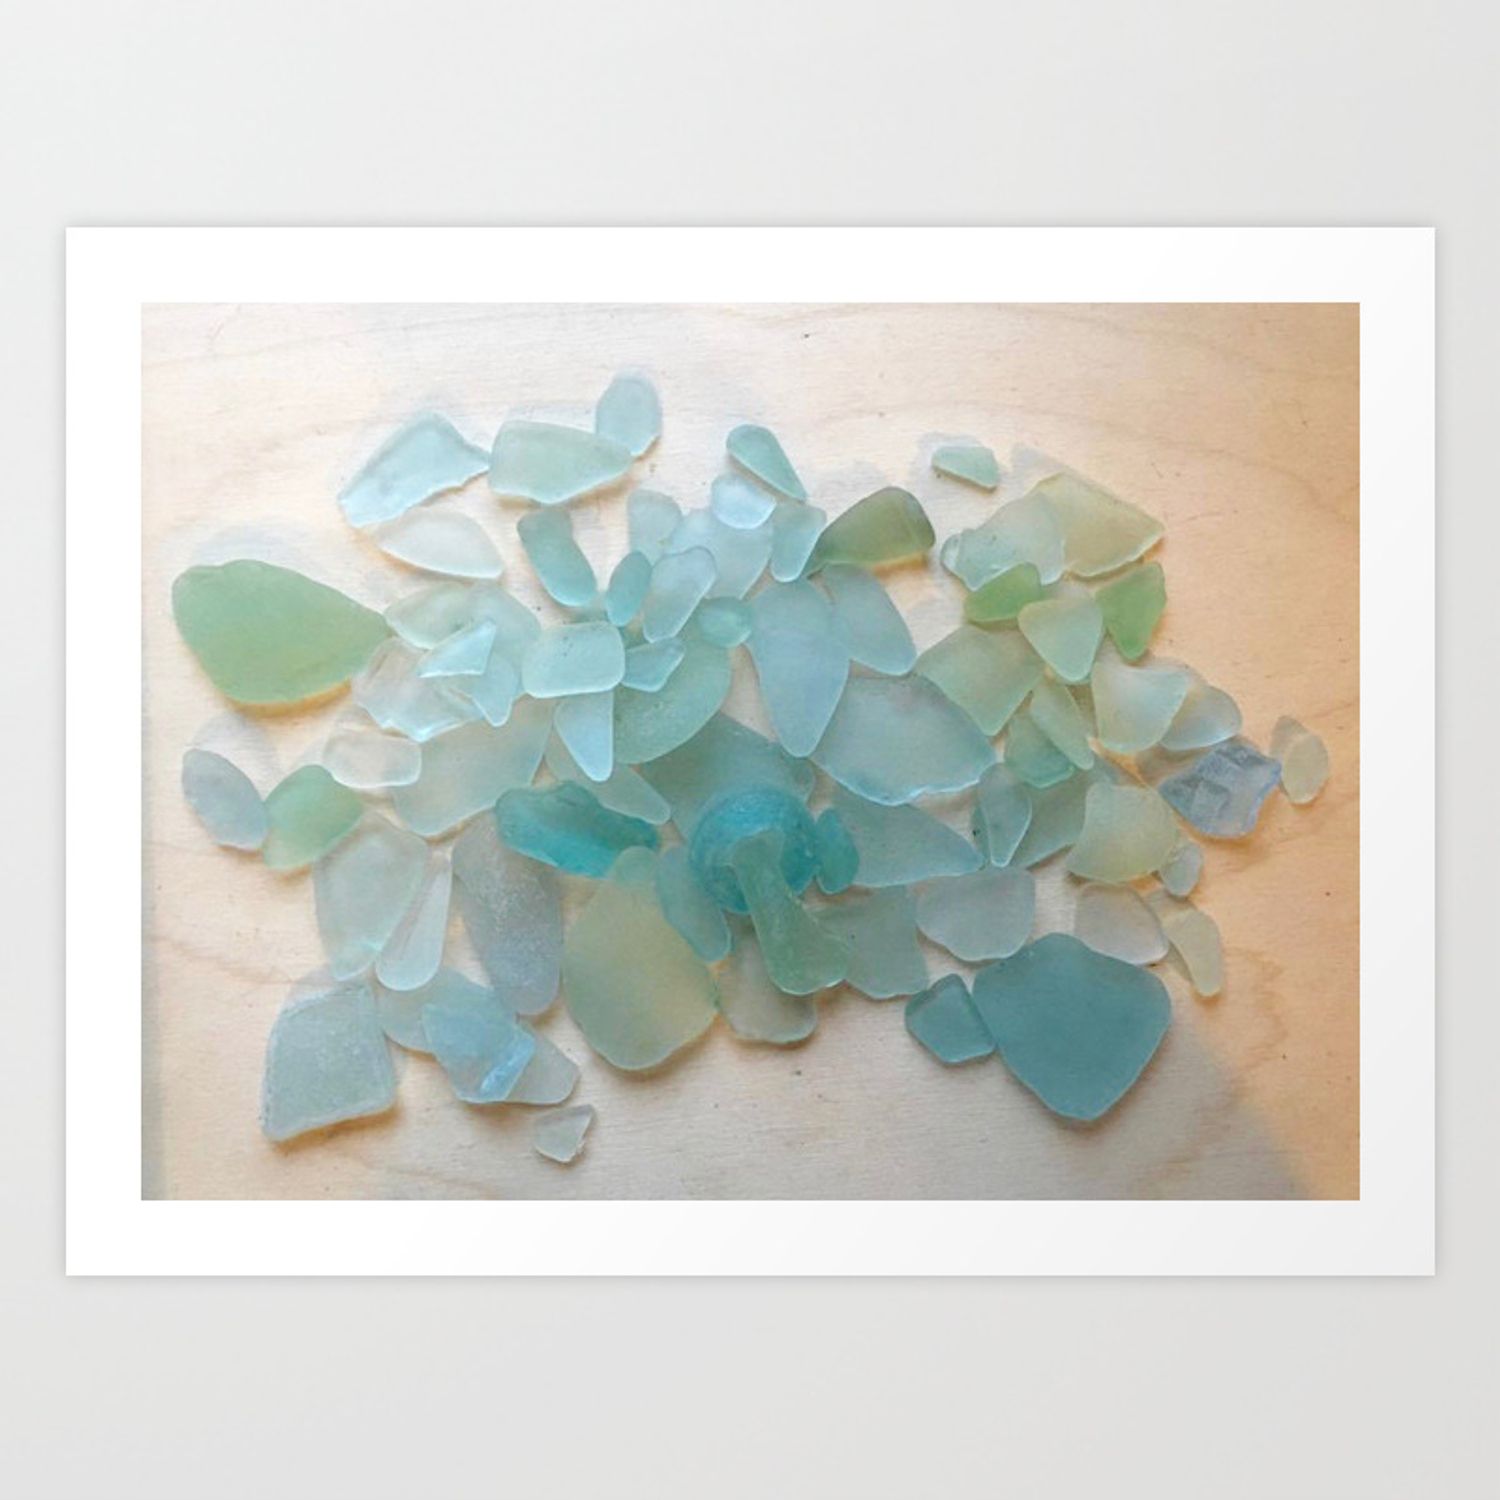 Ocean Hue Sea Glass Art Printcoastal Whims | Society6 Within Most Current Ocean Hue Wall Art (View 4 of 20)